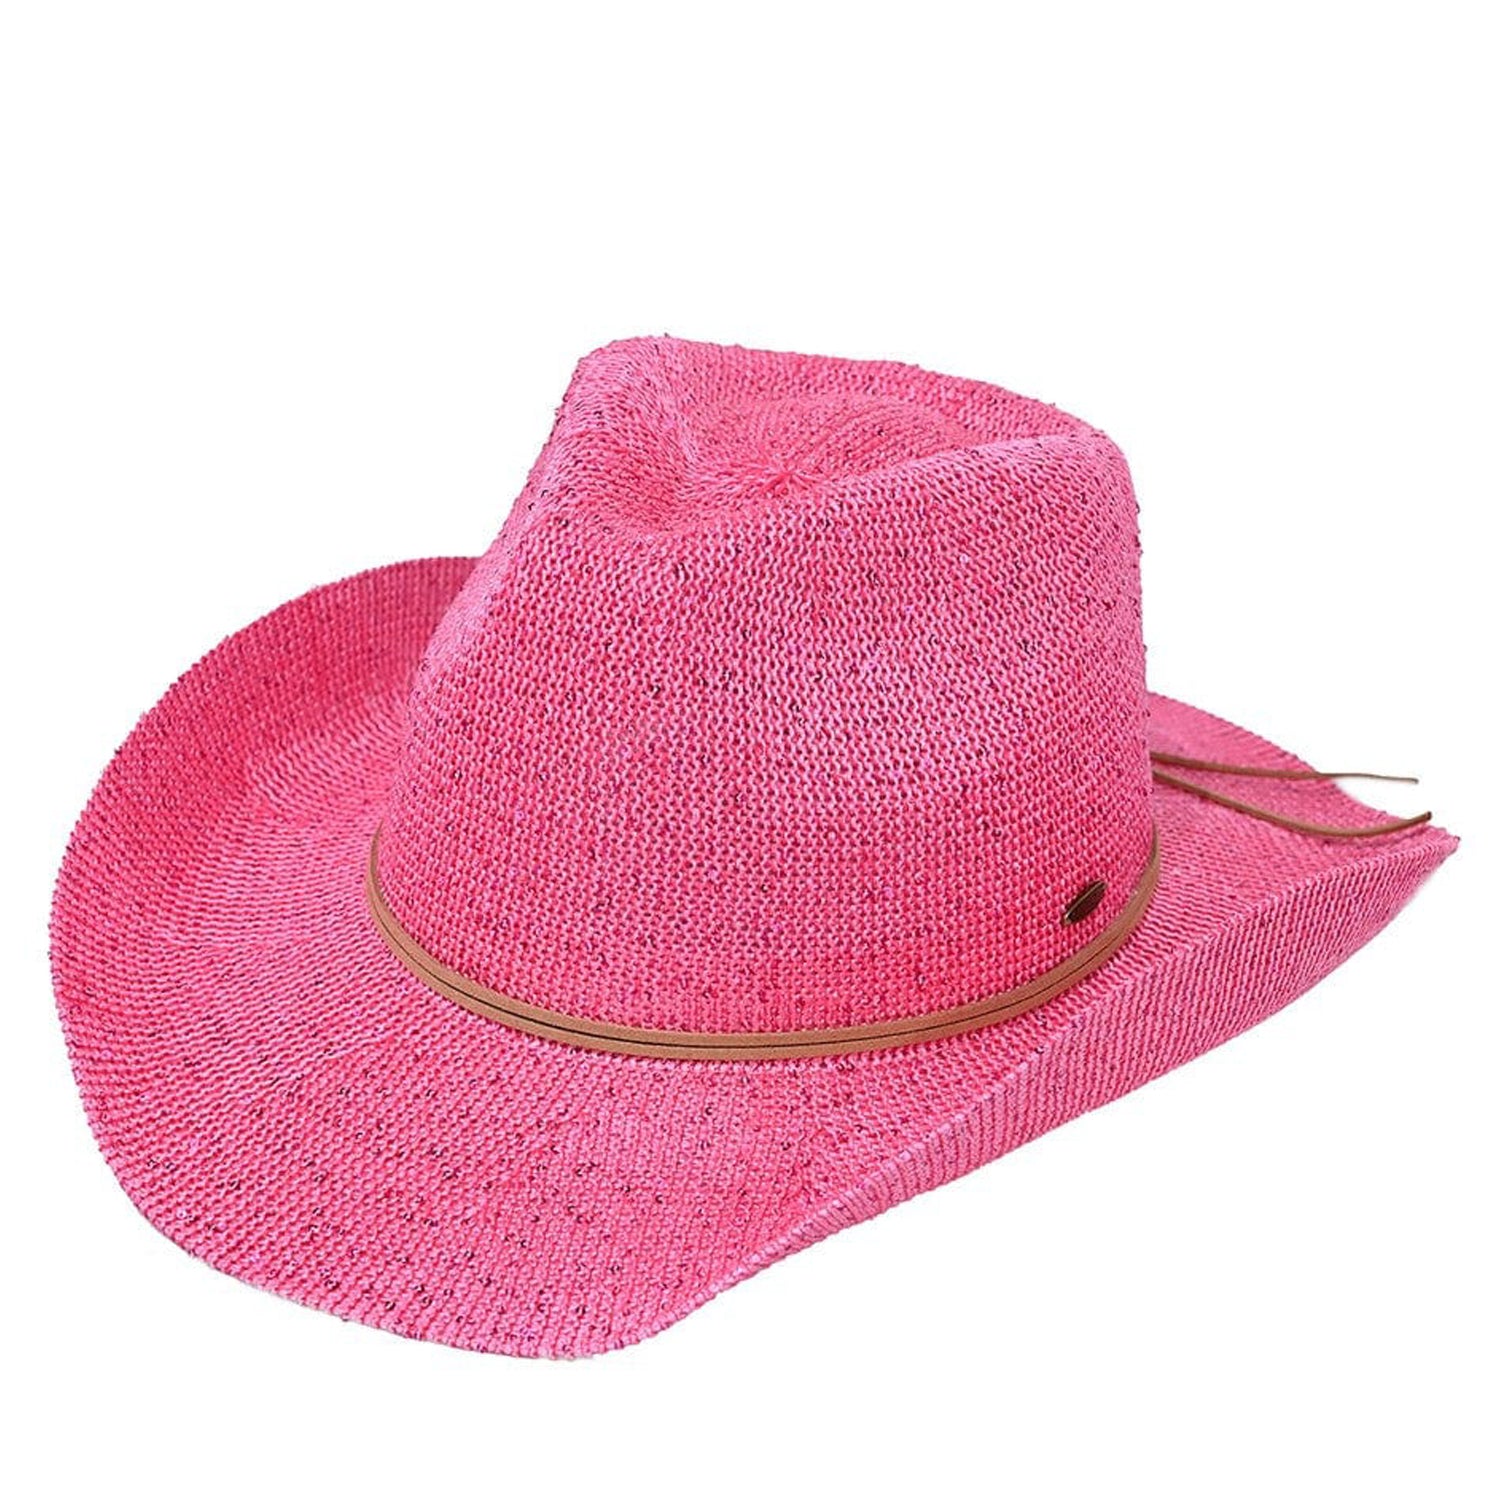 CBC-03 Cowgirl Hat with Glitter Pink